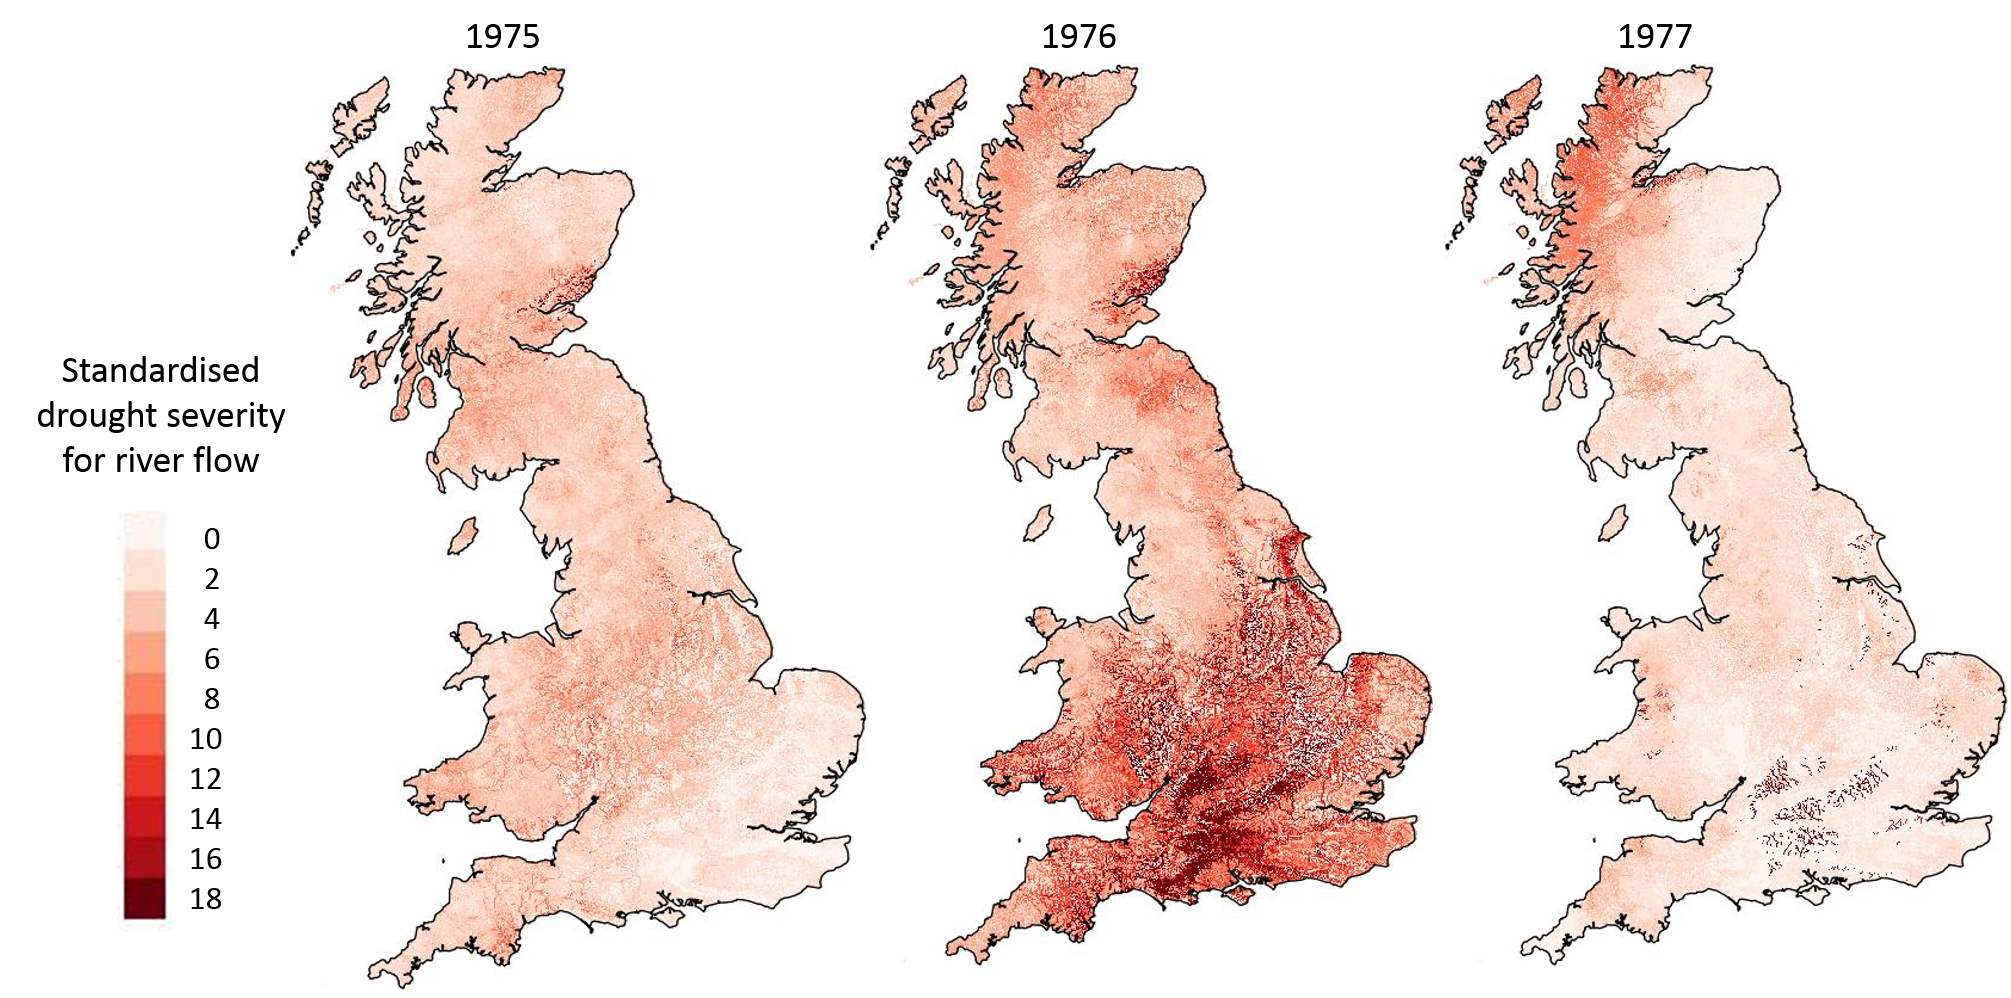 The maps show Grid-to-Grid model output (1km x 1km) of standardised drought severity (river flow) for 1975, 1976 and 1977. They maps show the most severe drought in each year. The darker the colour the more severe the drought.